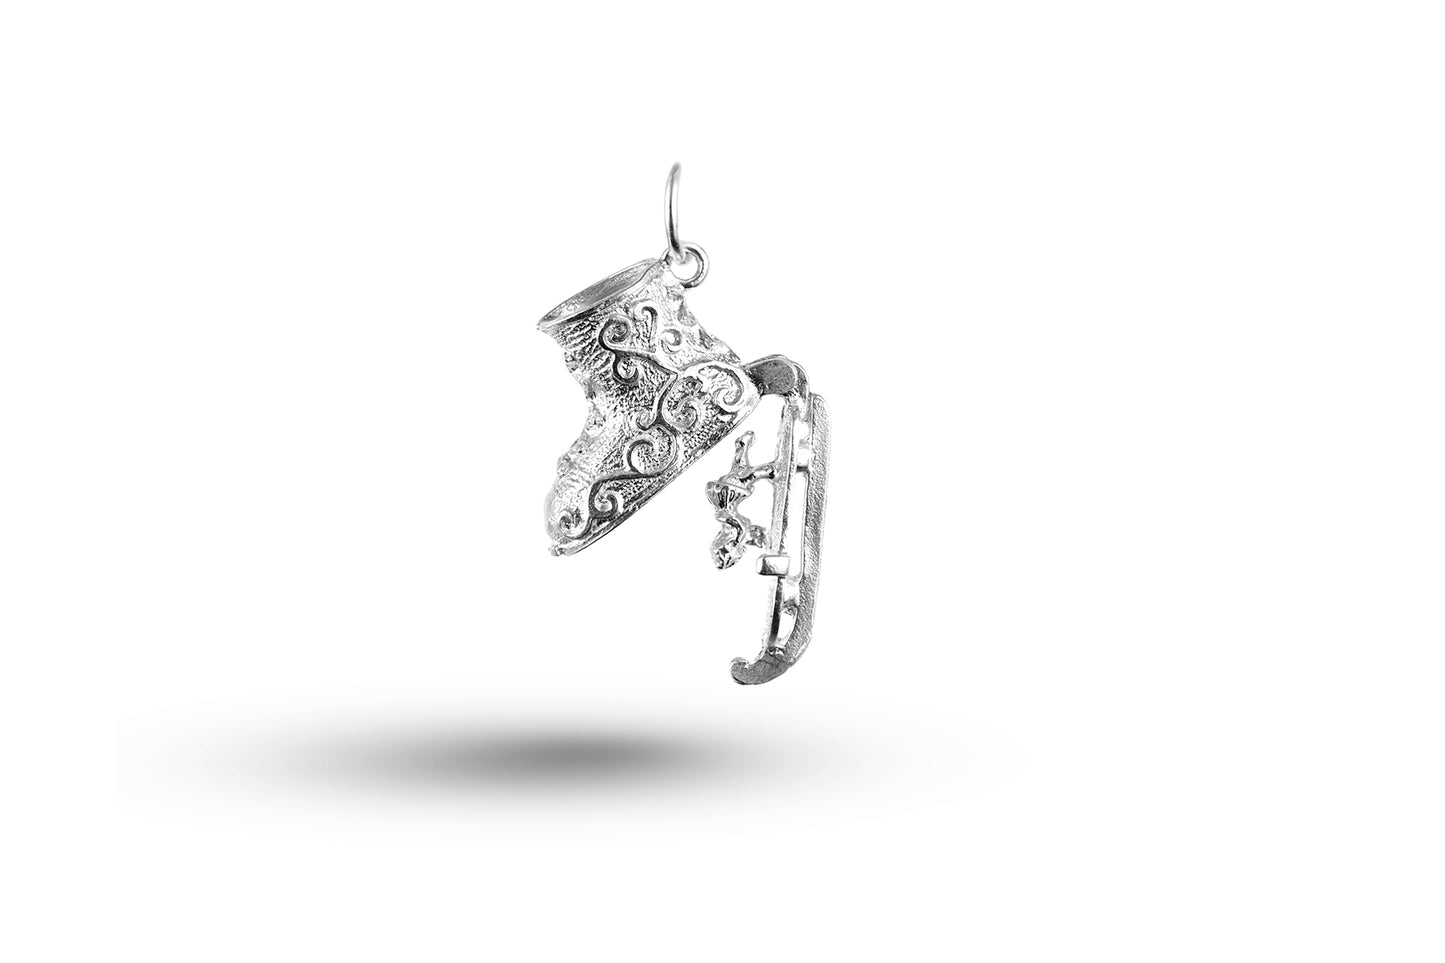 White gold Opening Ice Skate charm.